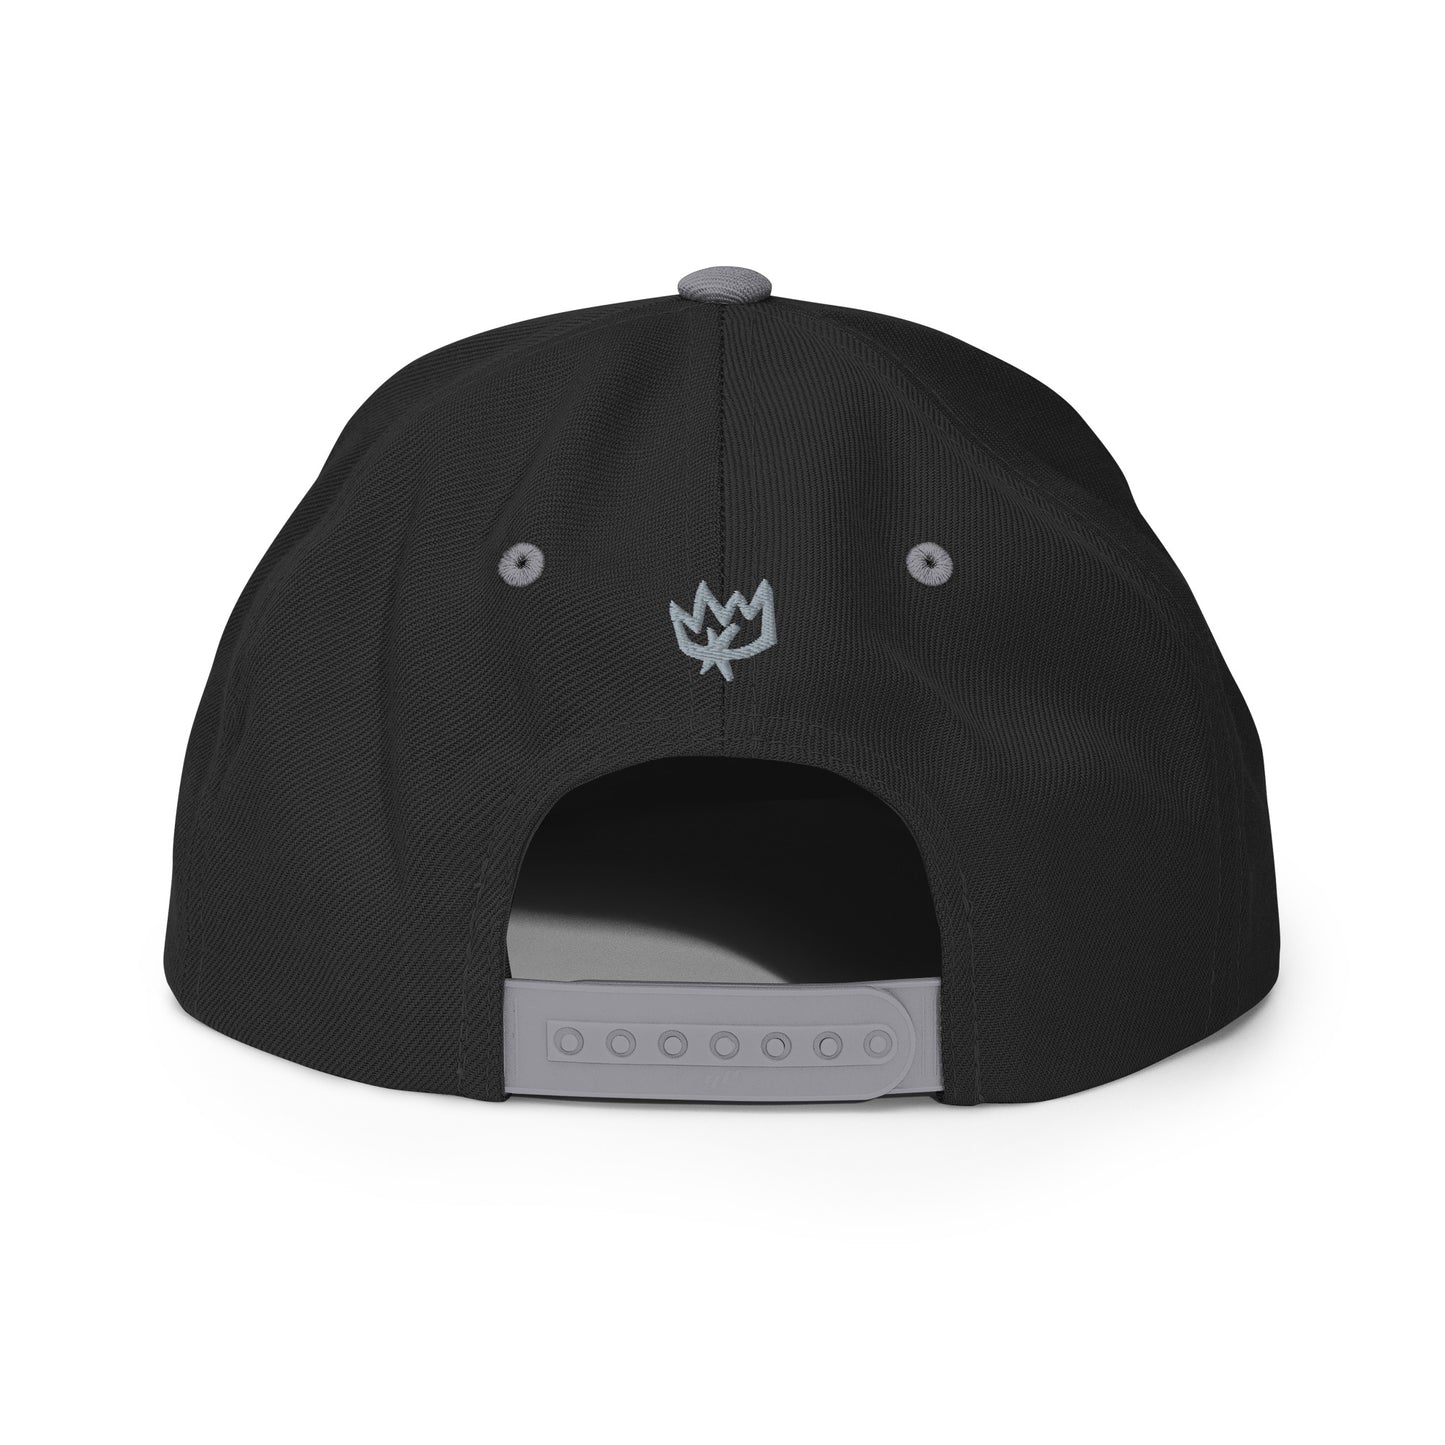 Black and Gray Crown Snapback Hat